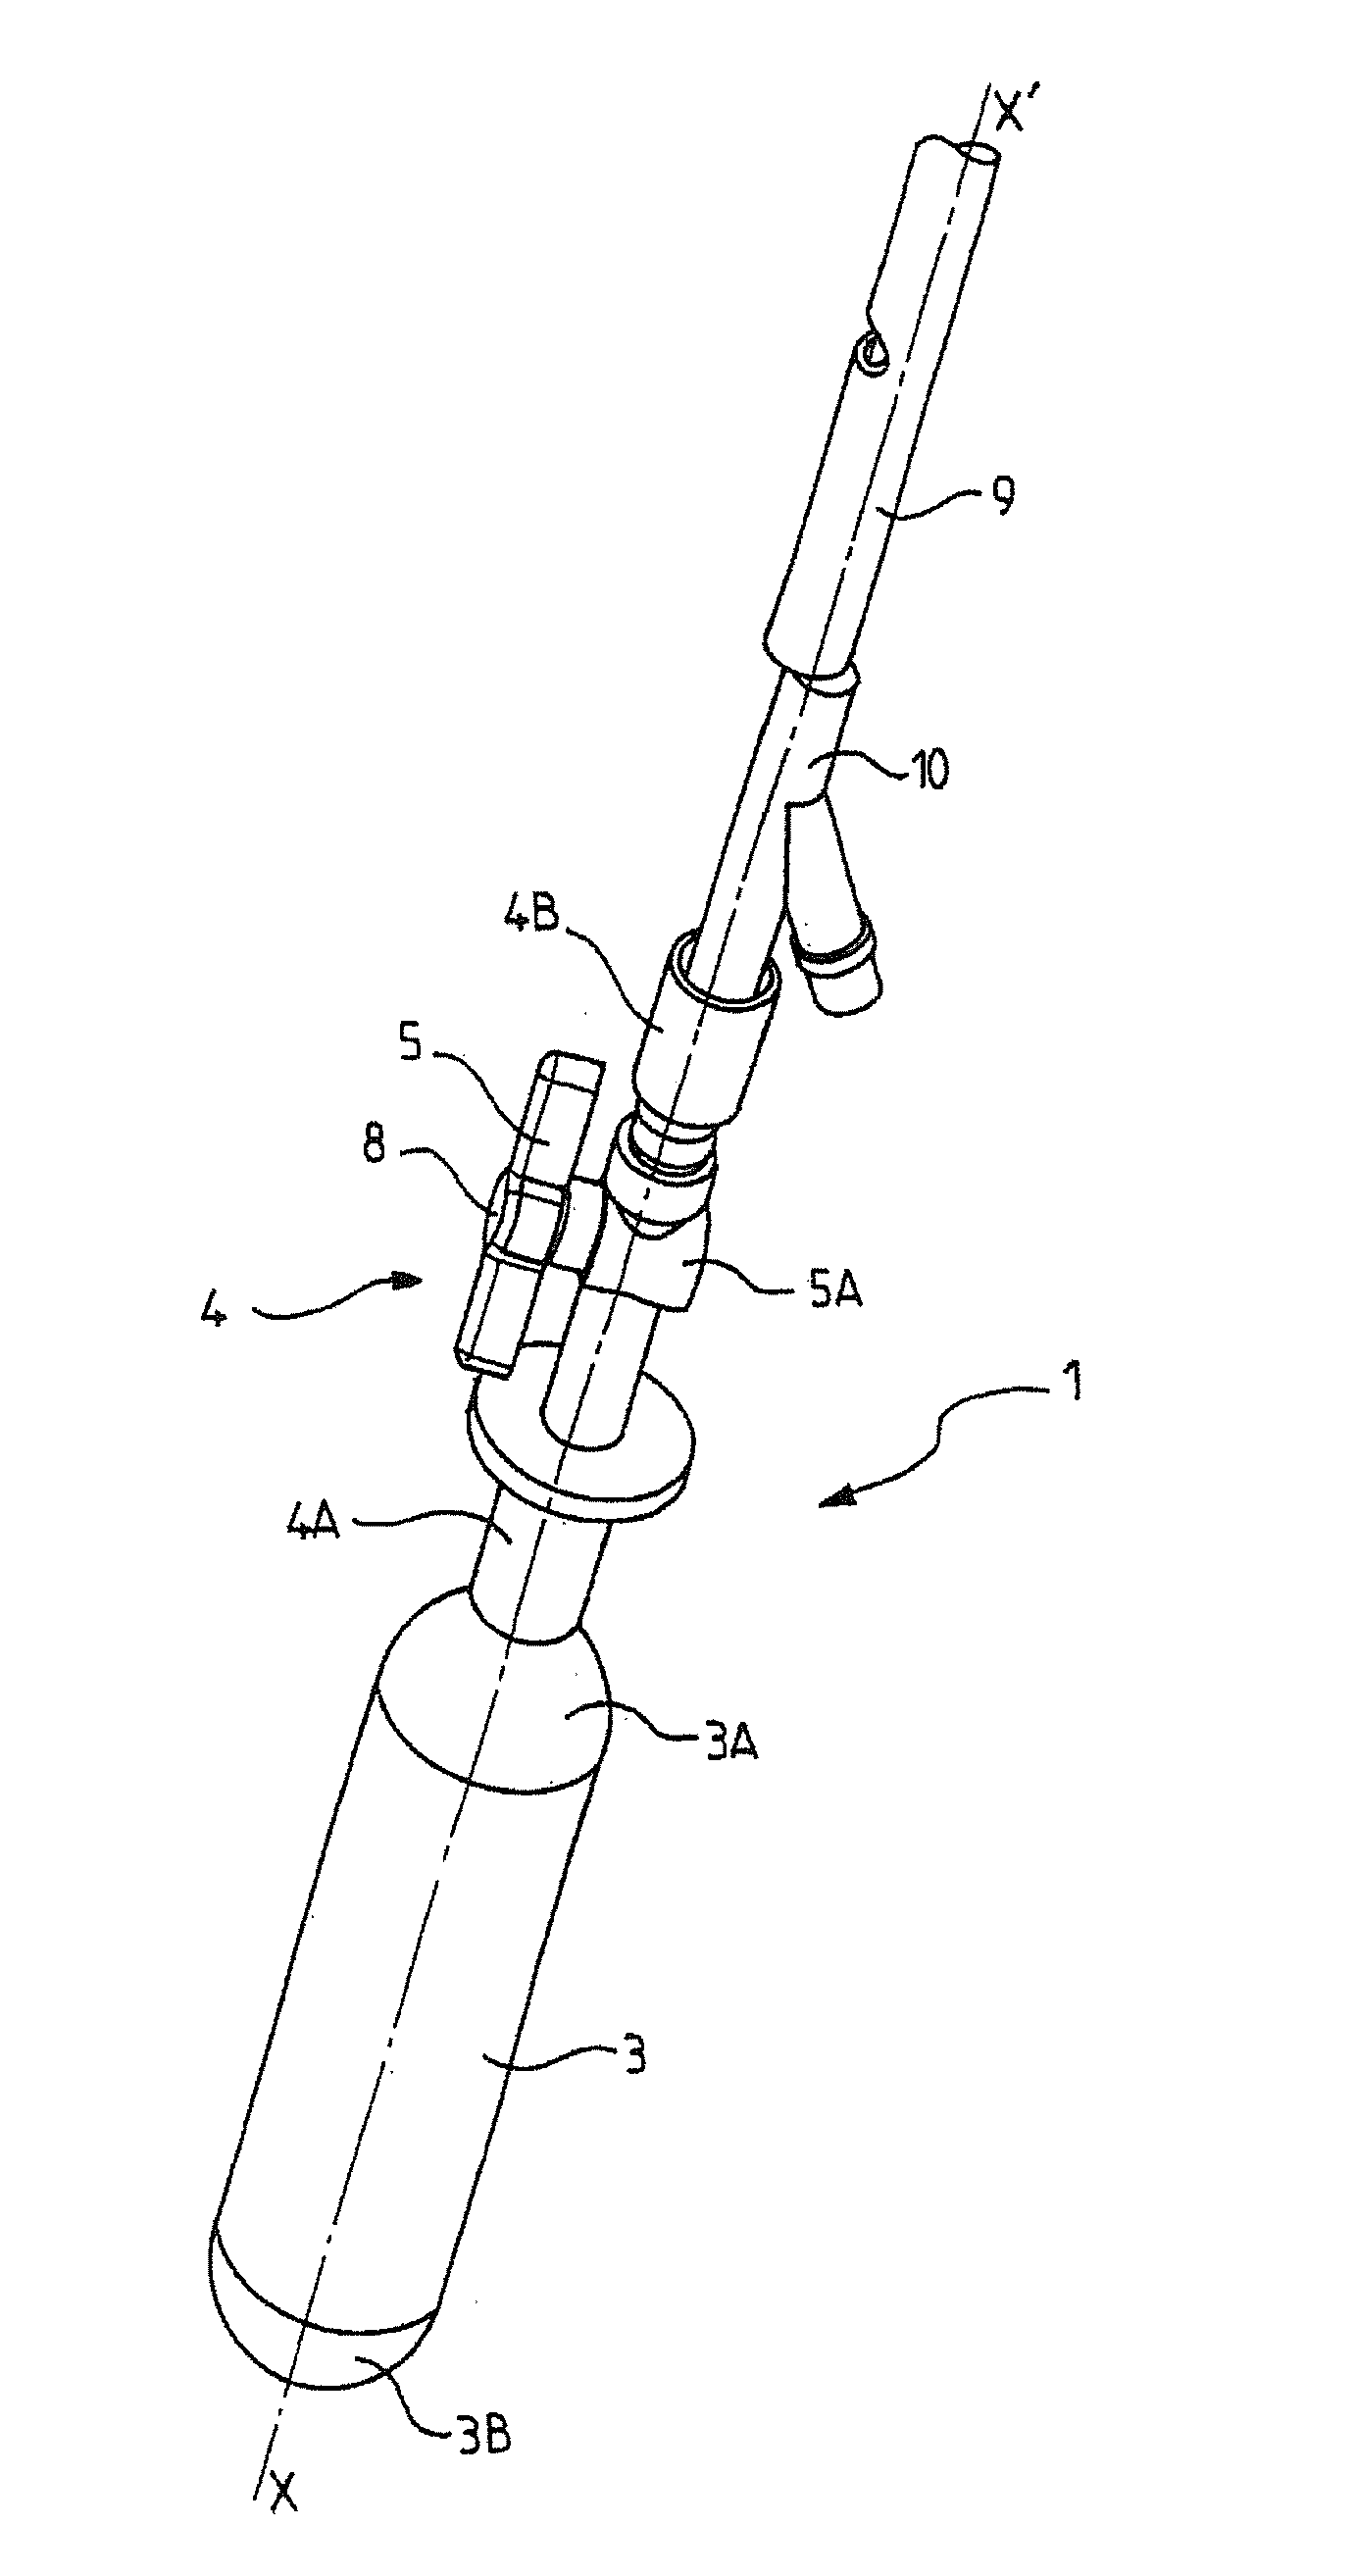 Device for inflating a surgical implant